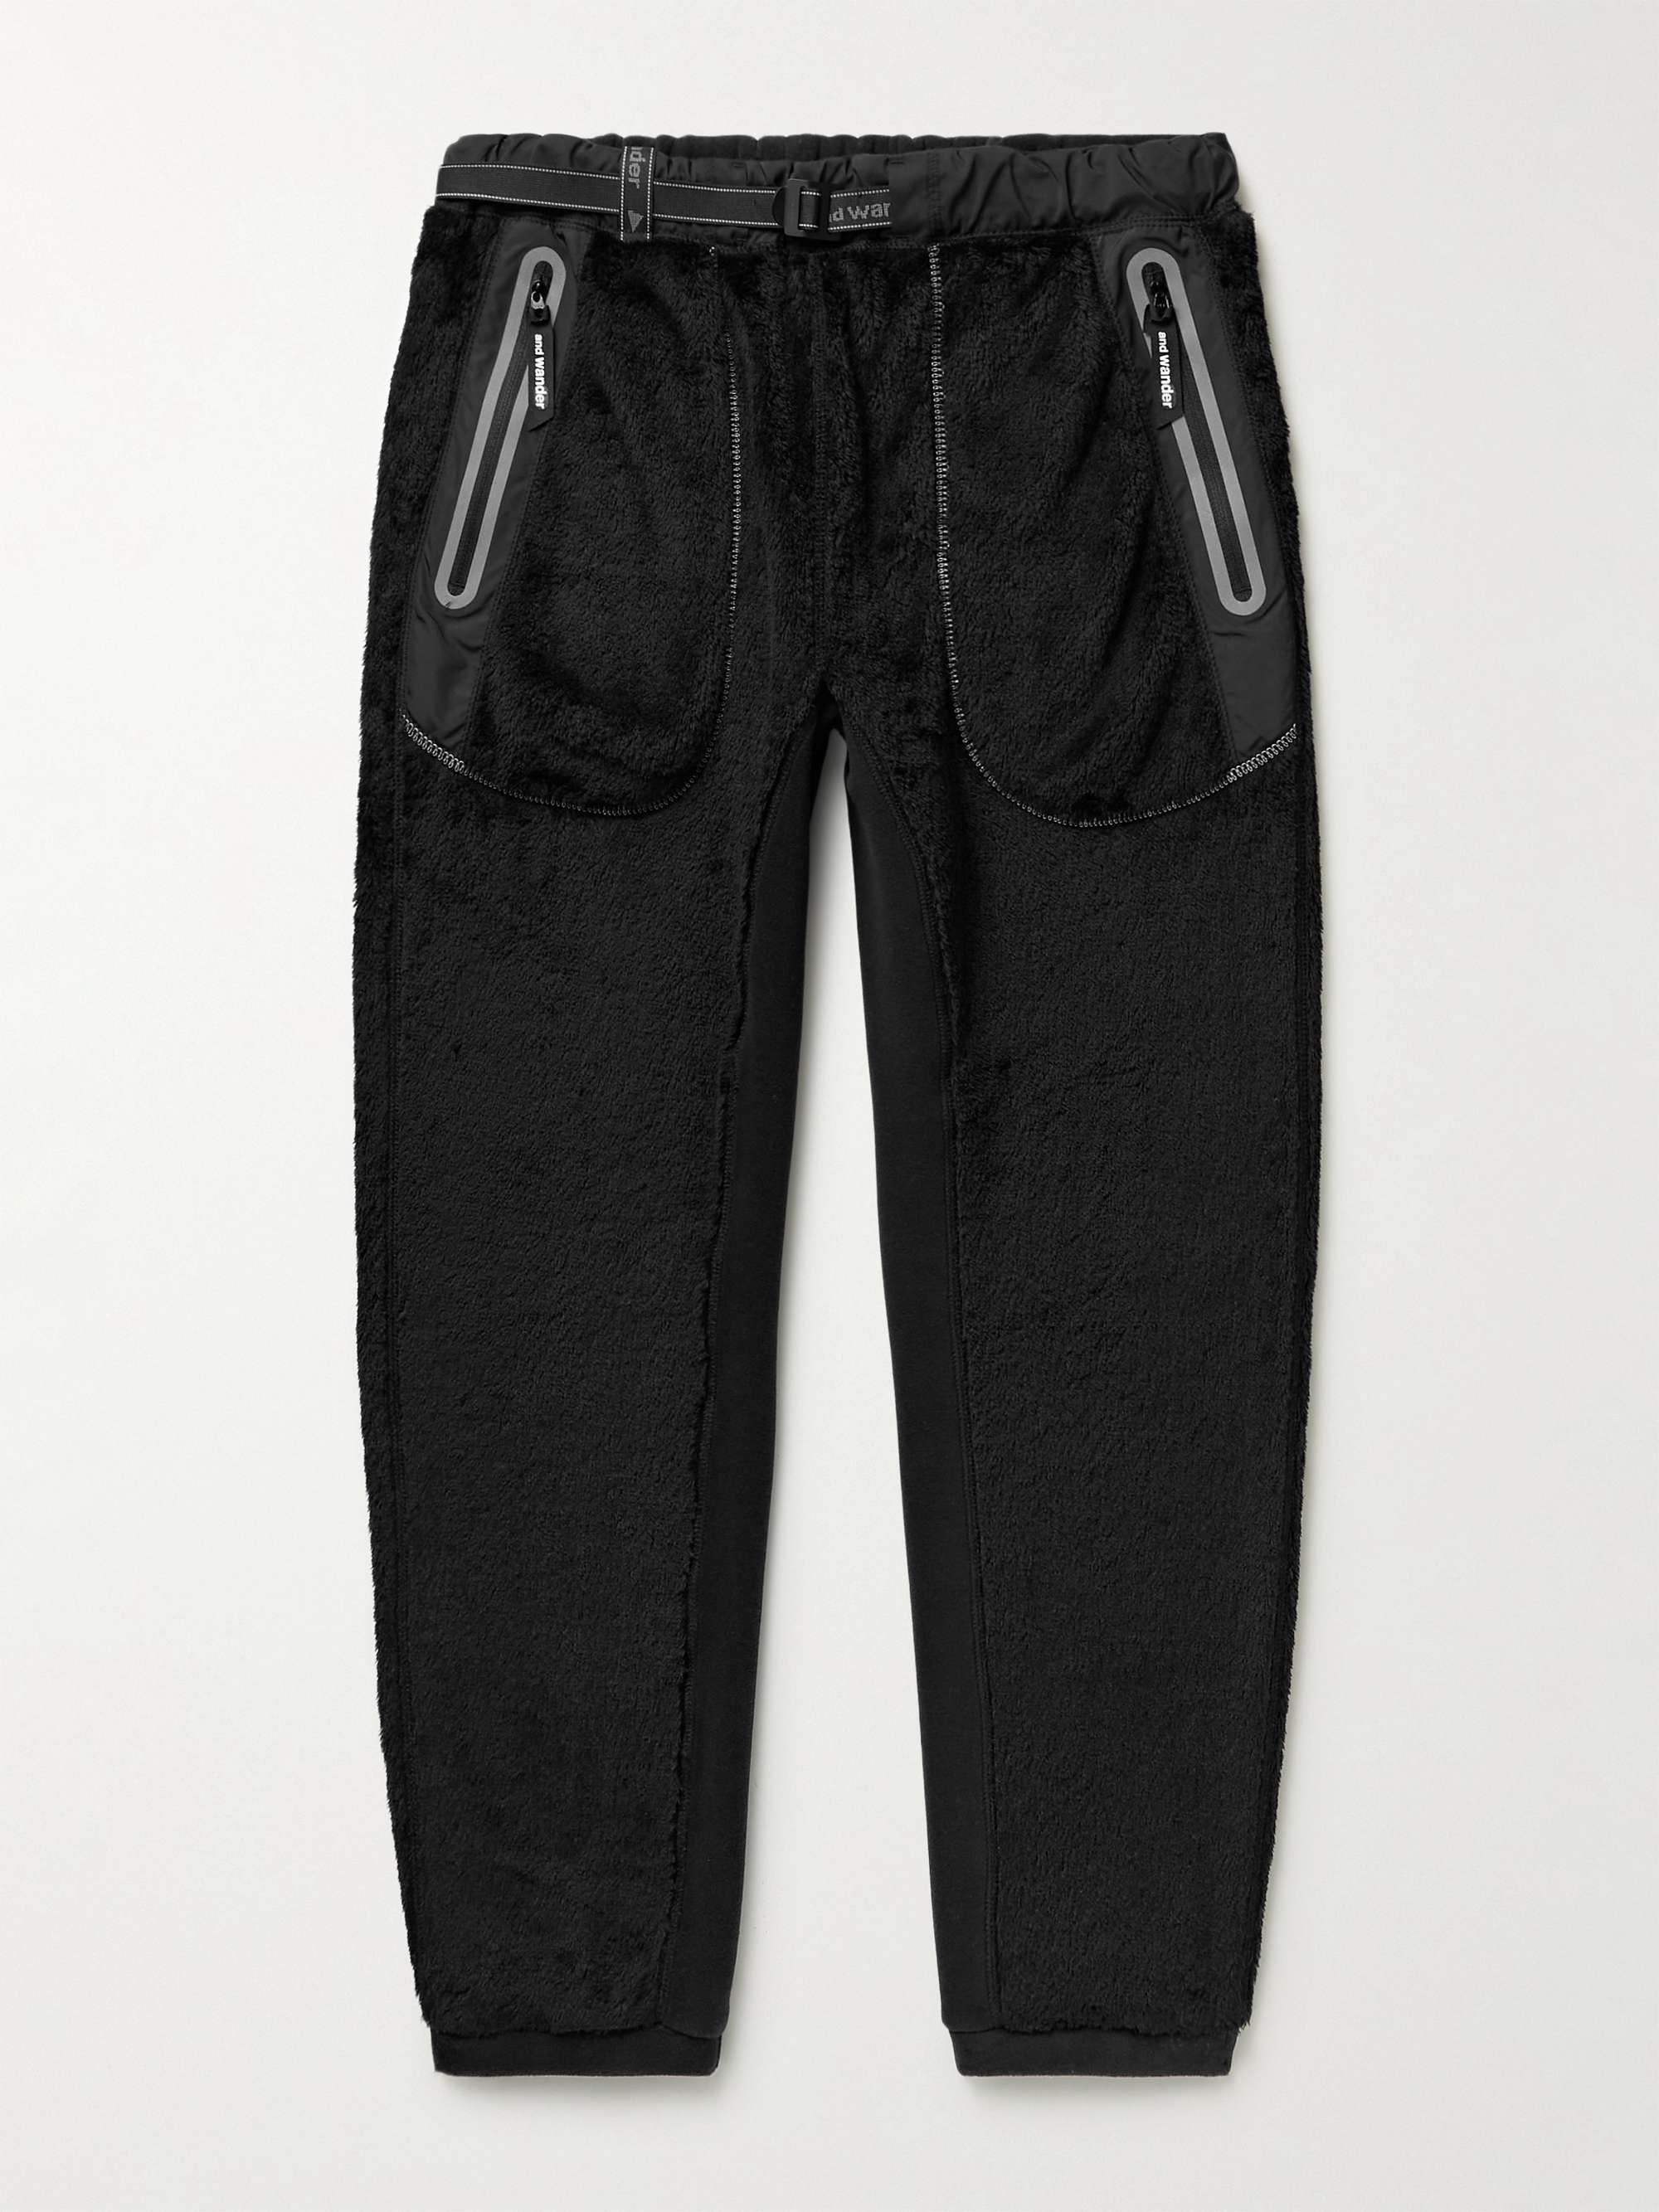 AND WANDER Slim-Fit Tapered Belted Polartec High Loft Fleece Sweatpants